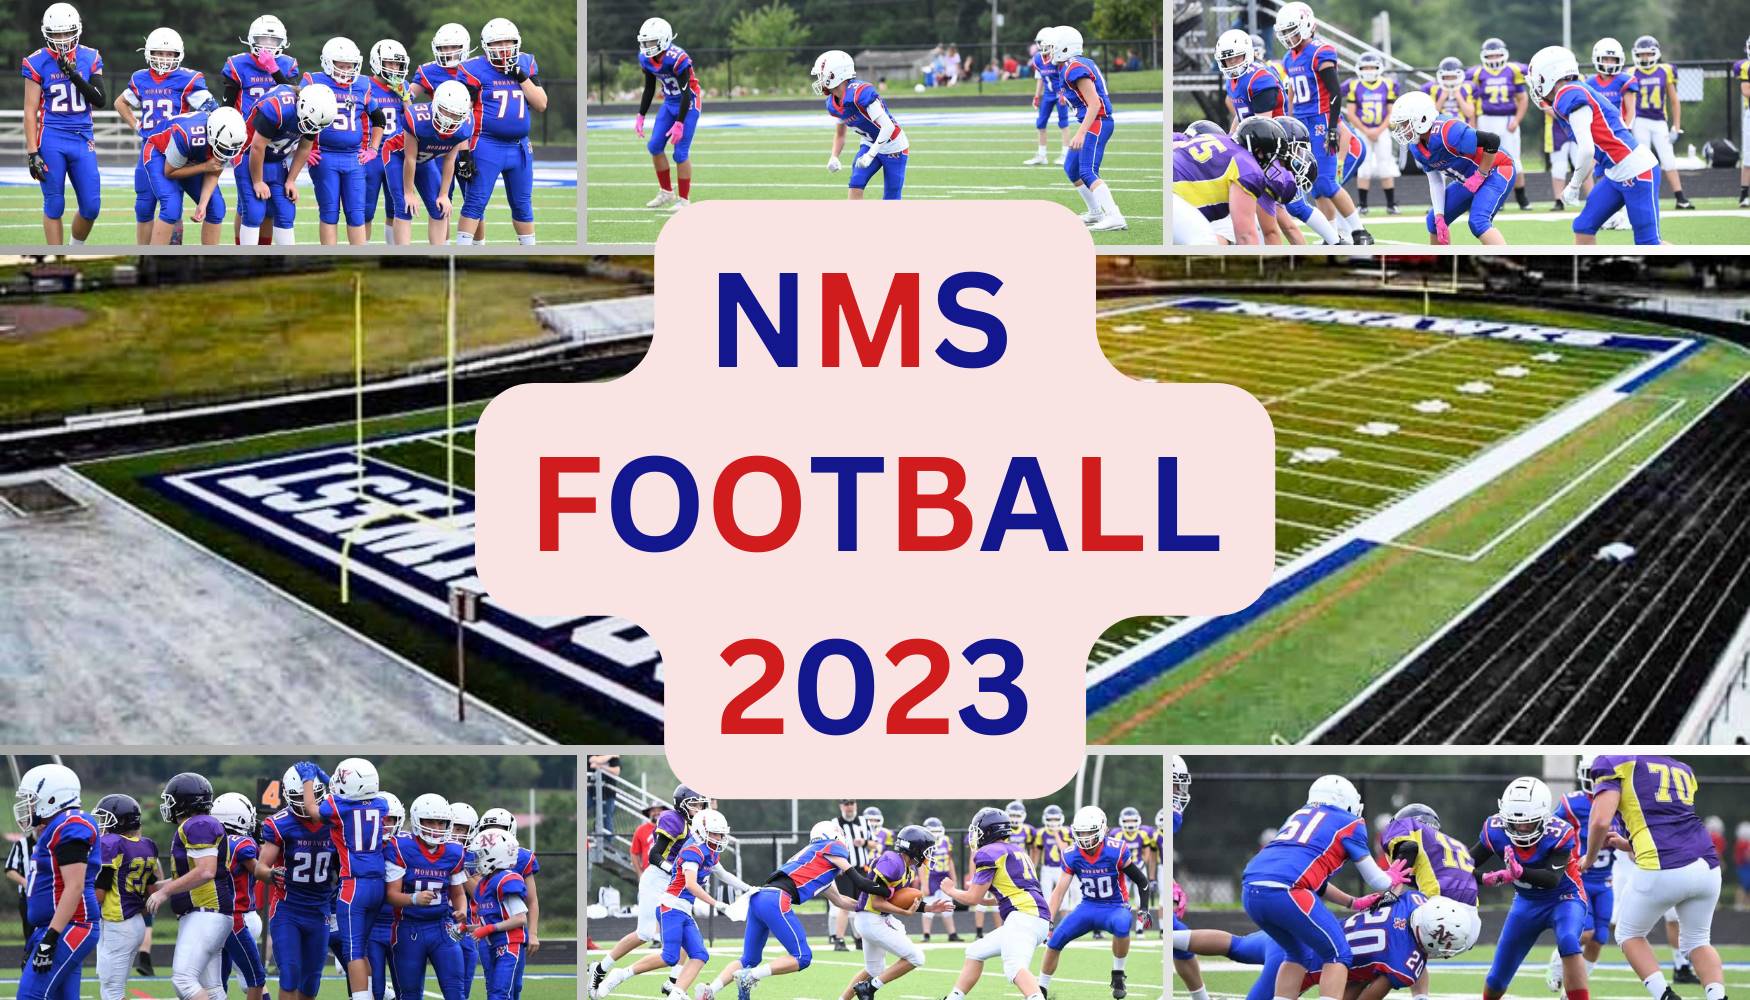 NMS Football 2023